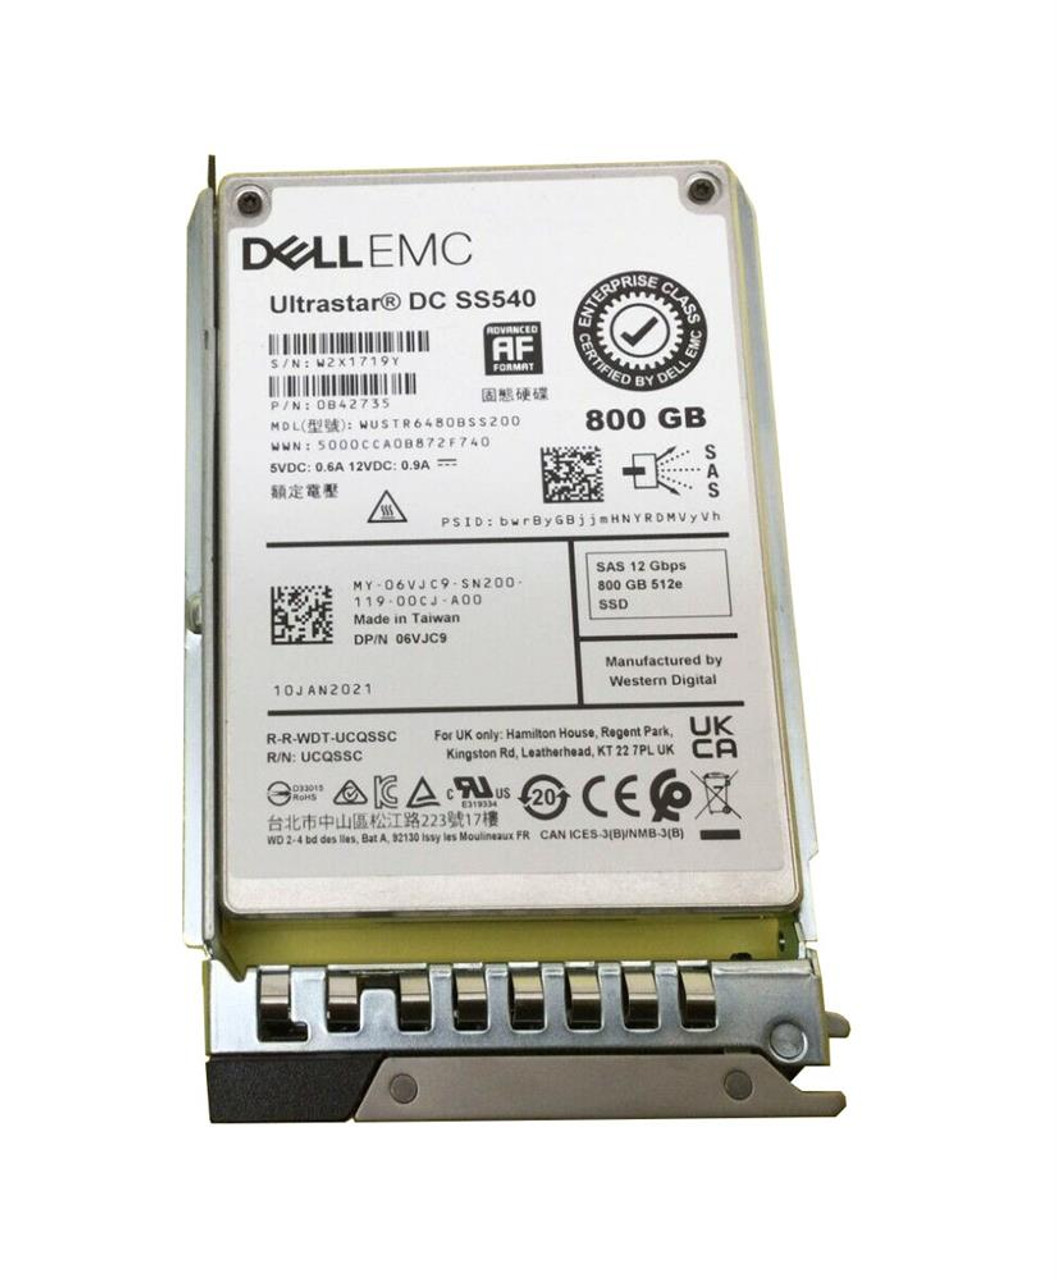 Western Digital 800GB SAS 12Gbps 2.5 Solid State Drive